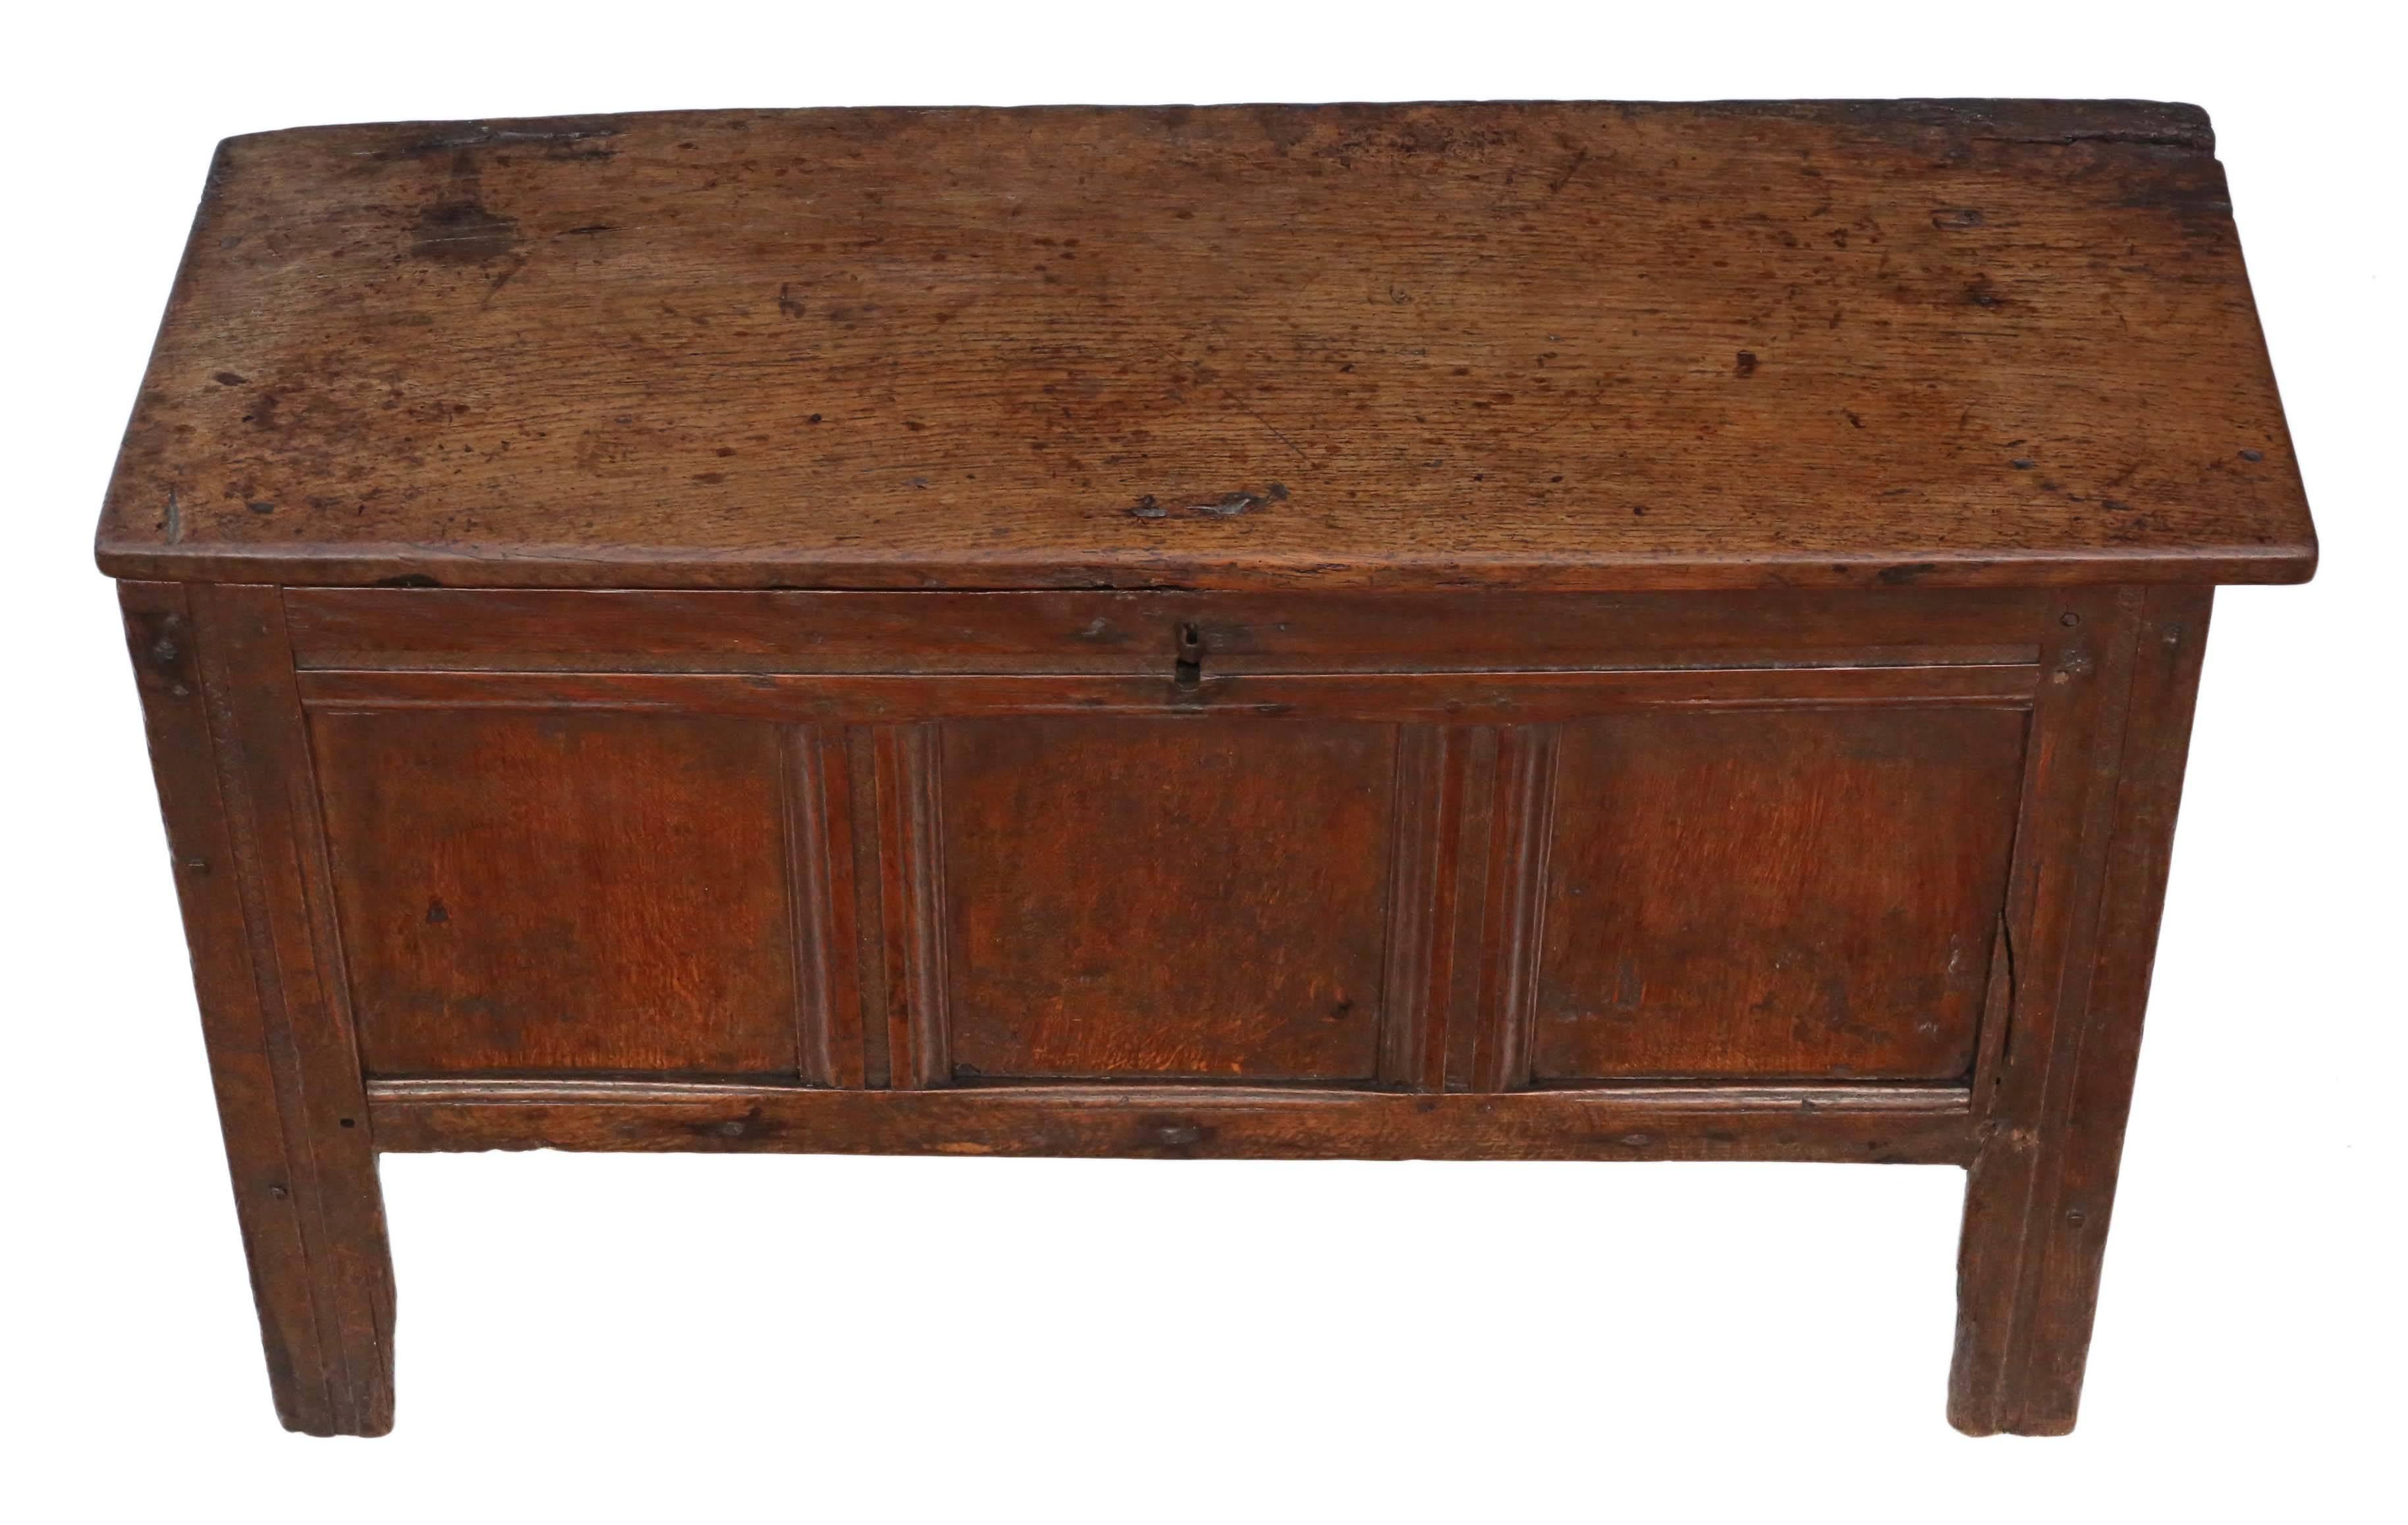 Antique 18th century and later Georgian oak coffer or mule chest.

Solid and strong, with no loose joints. Full of age, character and charm.

Would look great in the right location!

Overall maximum dimensions: 102cmW x 38cmD x 64cmH